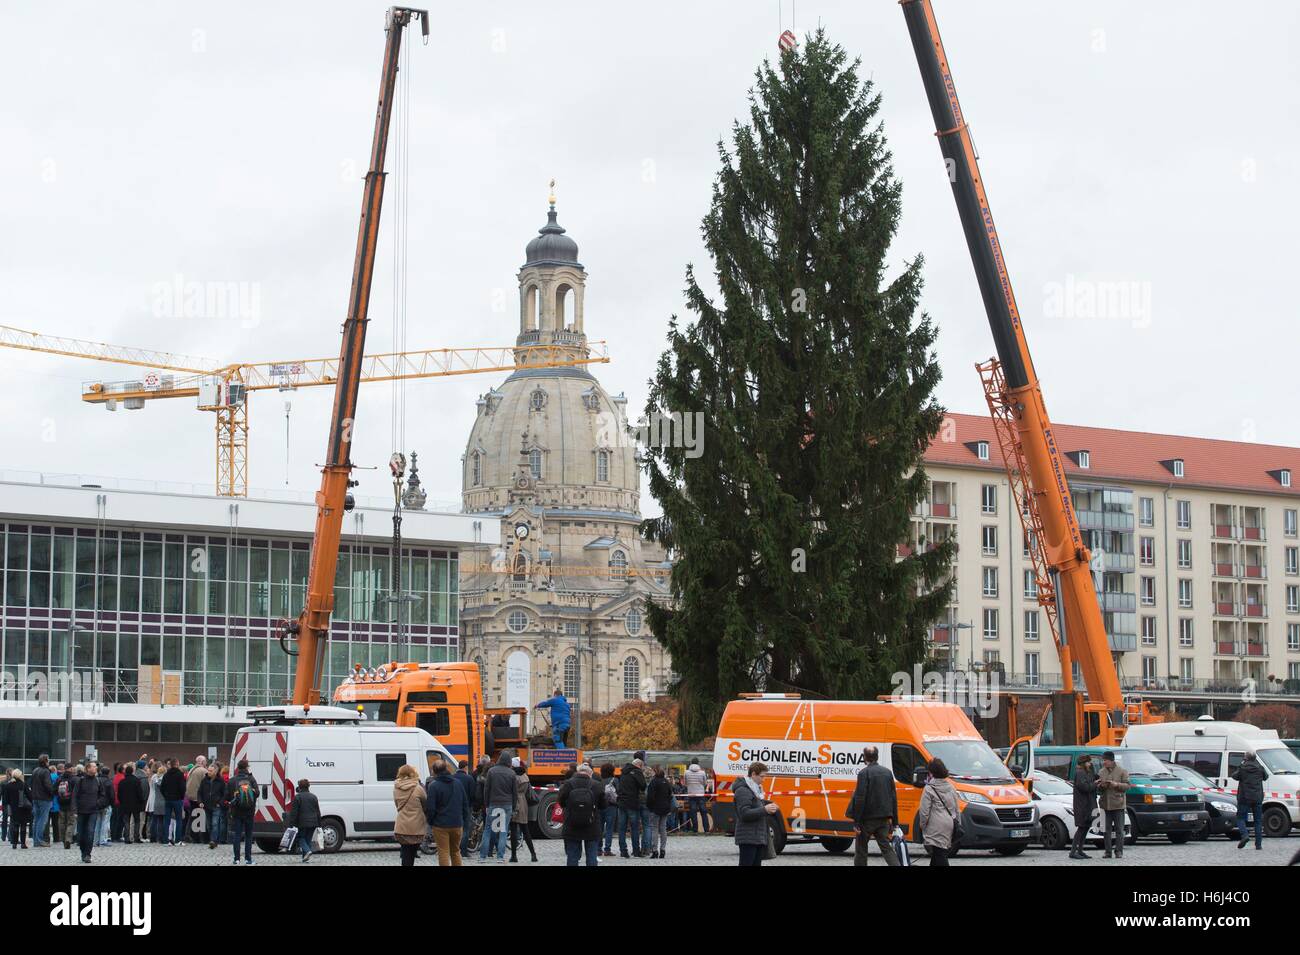 Dresden, Germany. 29th Oct, 2016. A crane lifts a 20-meter-tall European spruce to be erected on Altmarket square in front of the Frauenkirche curch in Dresden, Germany, 29 October 2016. The five-ton conifer was cut down today in Pulsnitz and brought to Dresden. It will form the centerpiece at the Dresden Striezelmarkt Christmas market, which opens 24 November 2016. Photo: SEBASTIAN KAHNERT/dpa/Alamy Live News Stock Photo